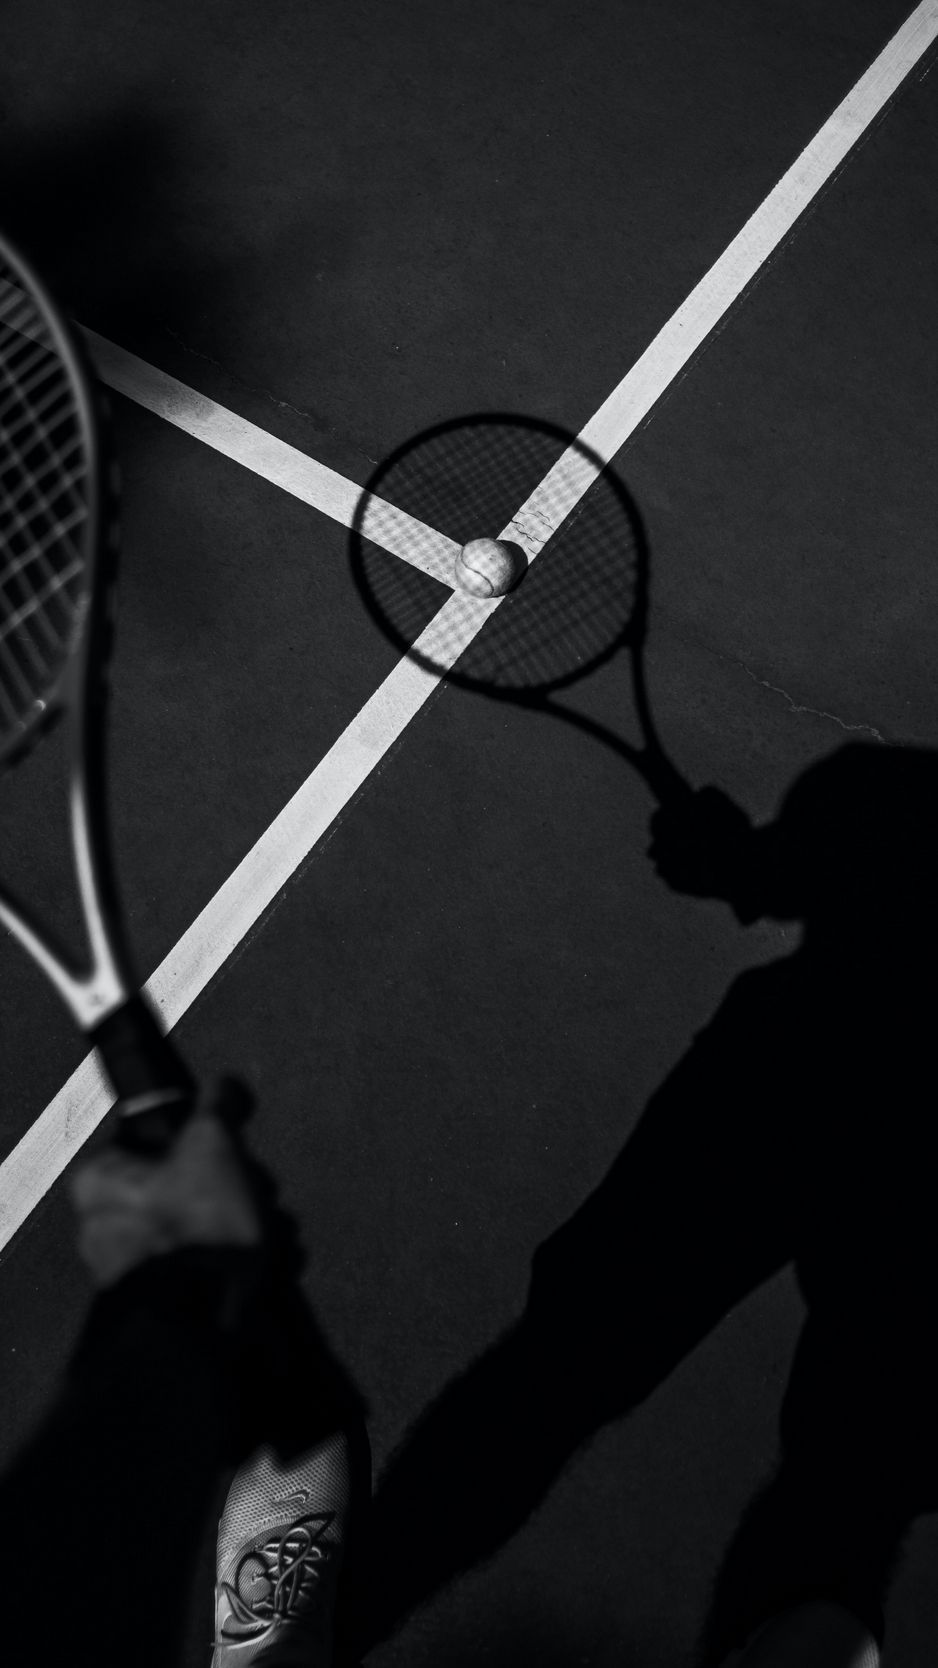 A person holding two tennis rackets on the court - Tennis